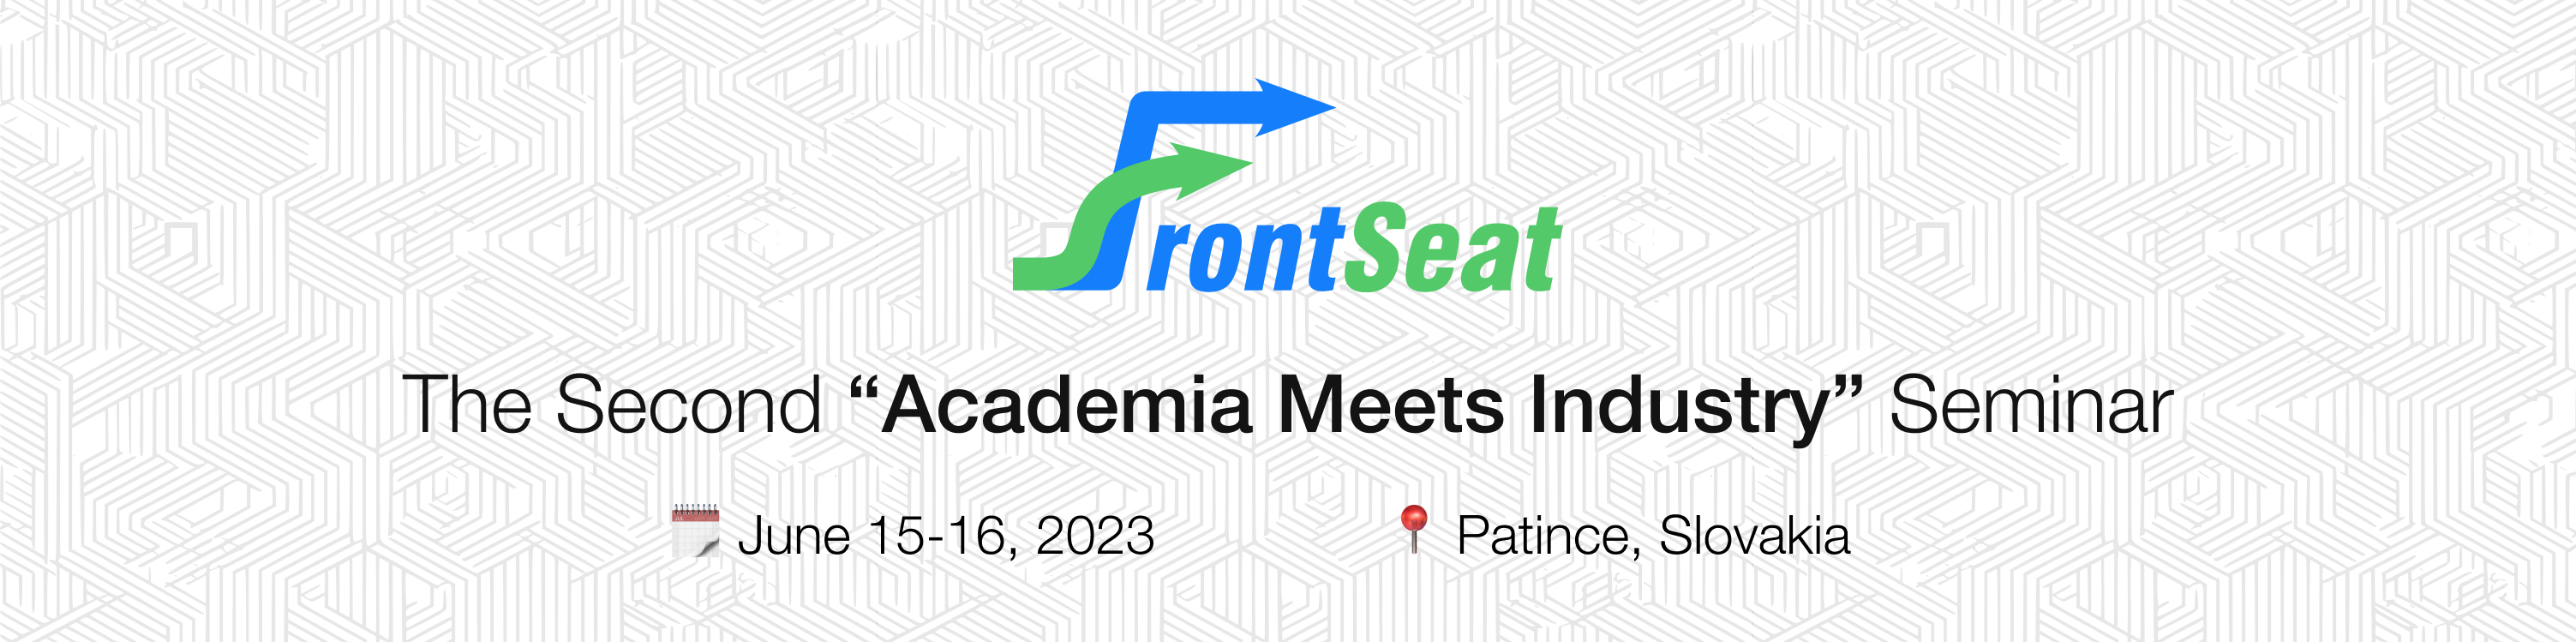 Second Academia Meets Industry